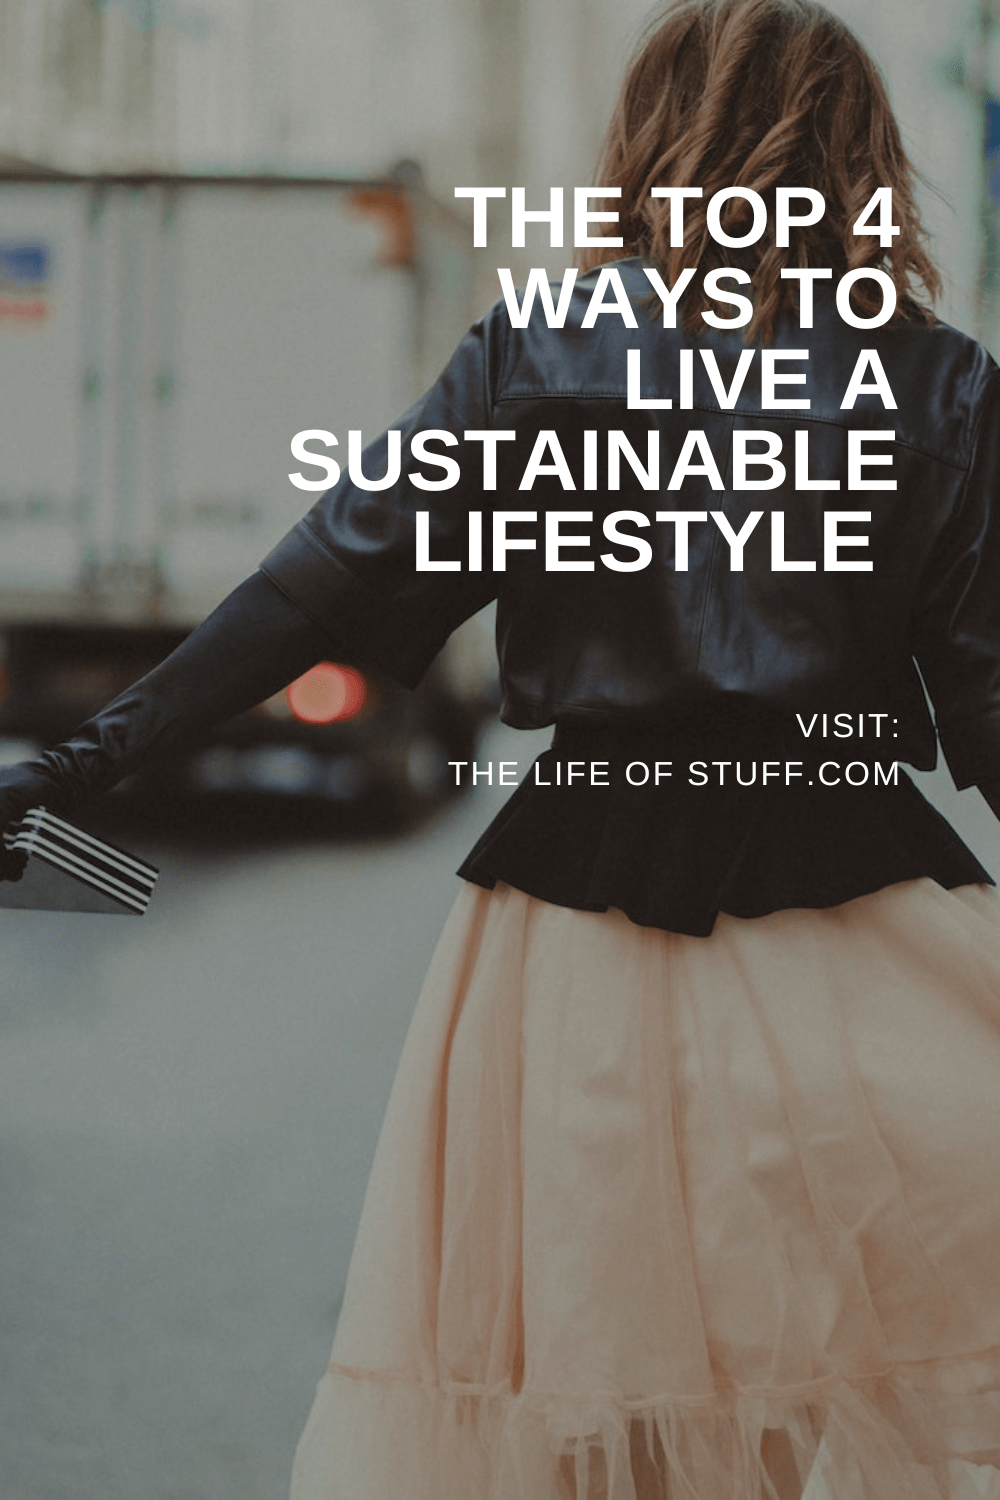 The Top 4 Ways To Live A Sustainable Lifestyle - The Life of Stuff